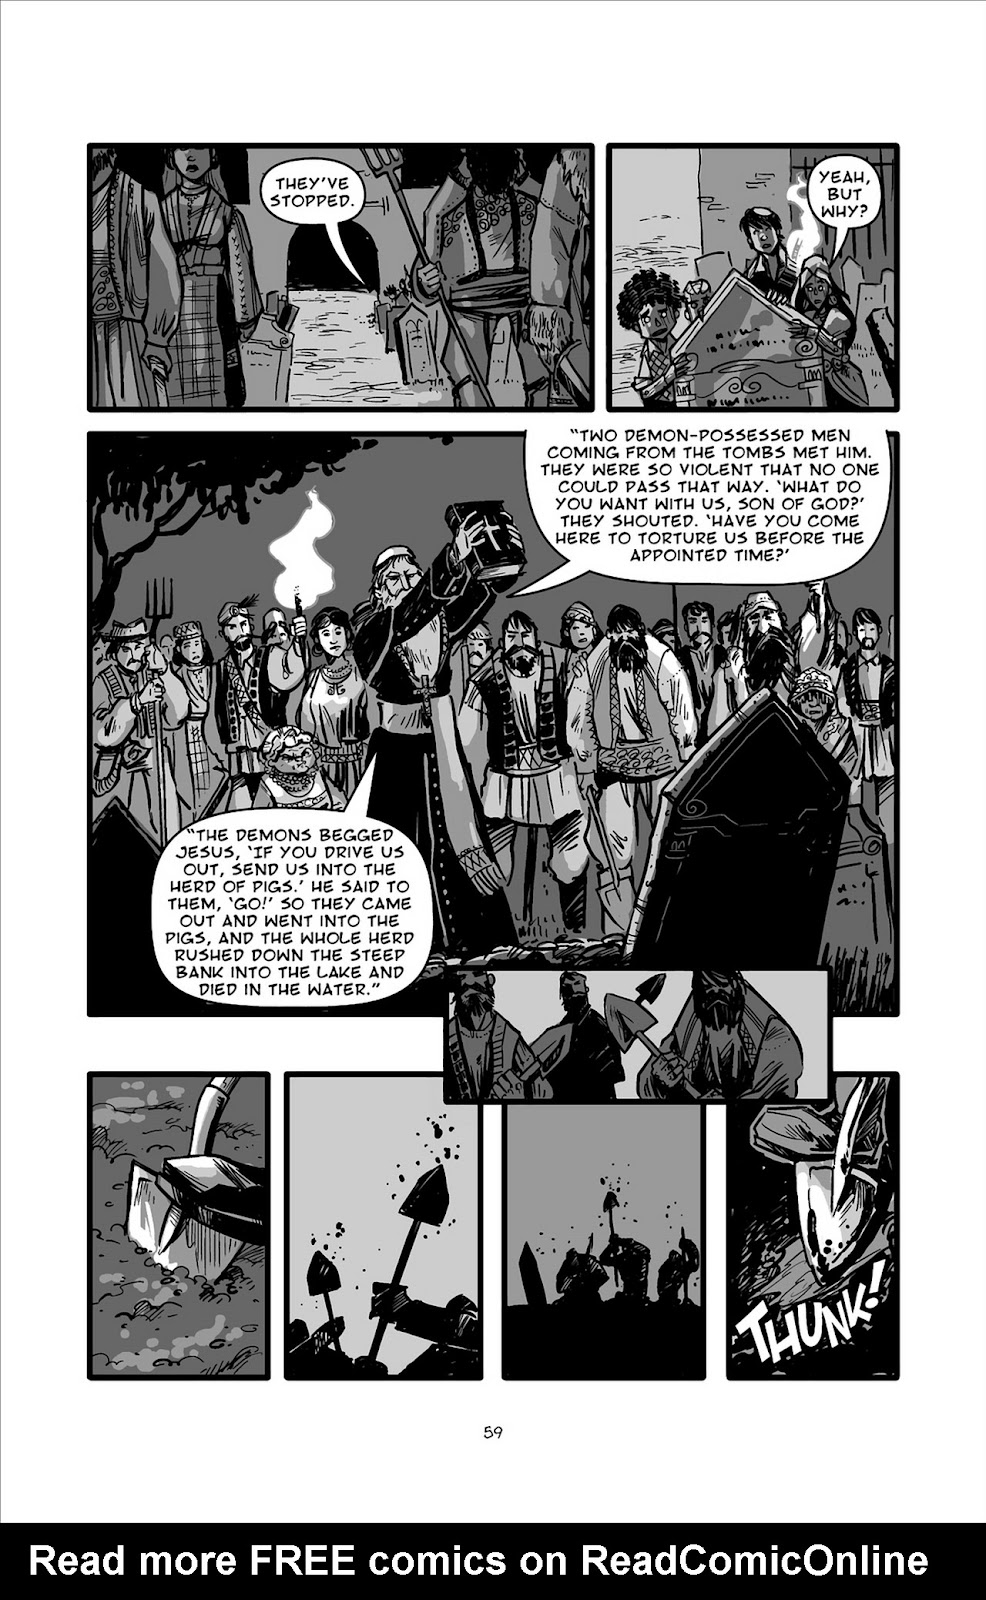 Pinocchio: Vampire Slayer - Of Wood and Blood issue 3 - Page 10